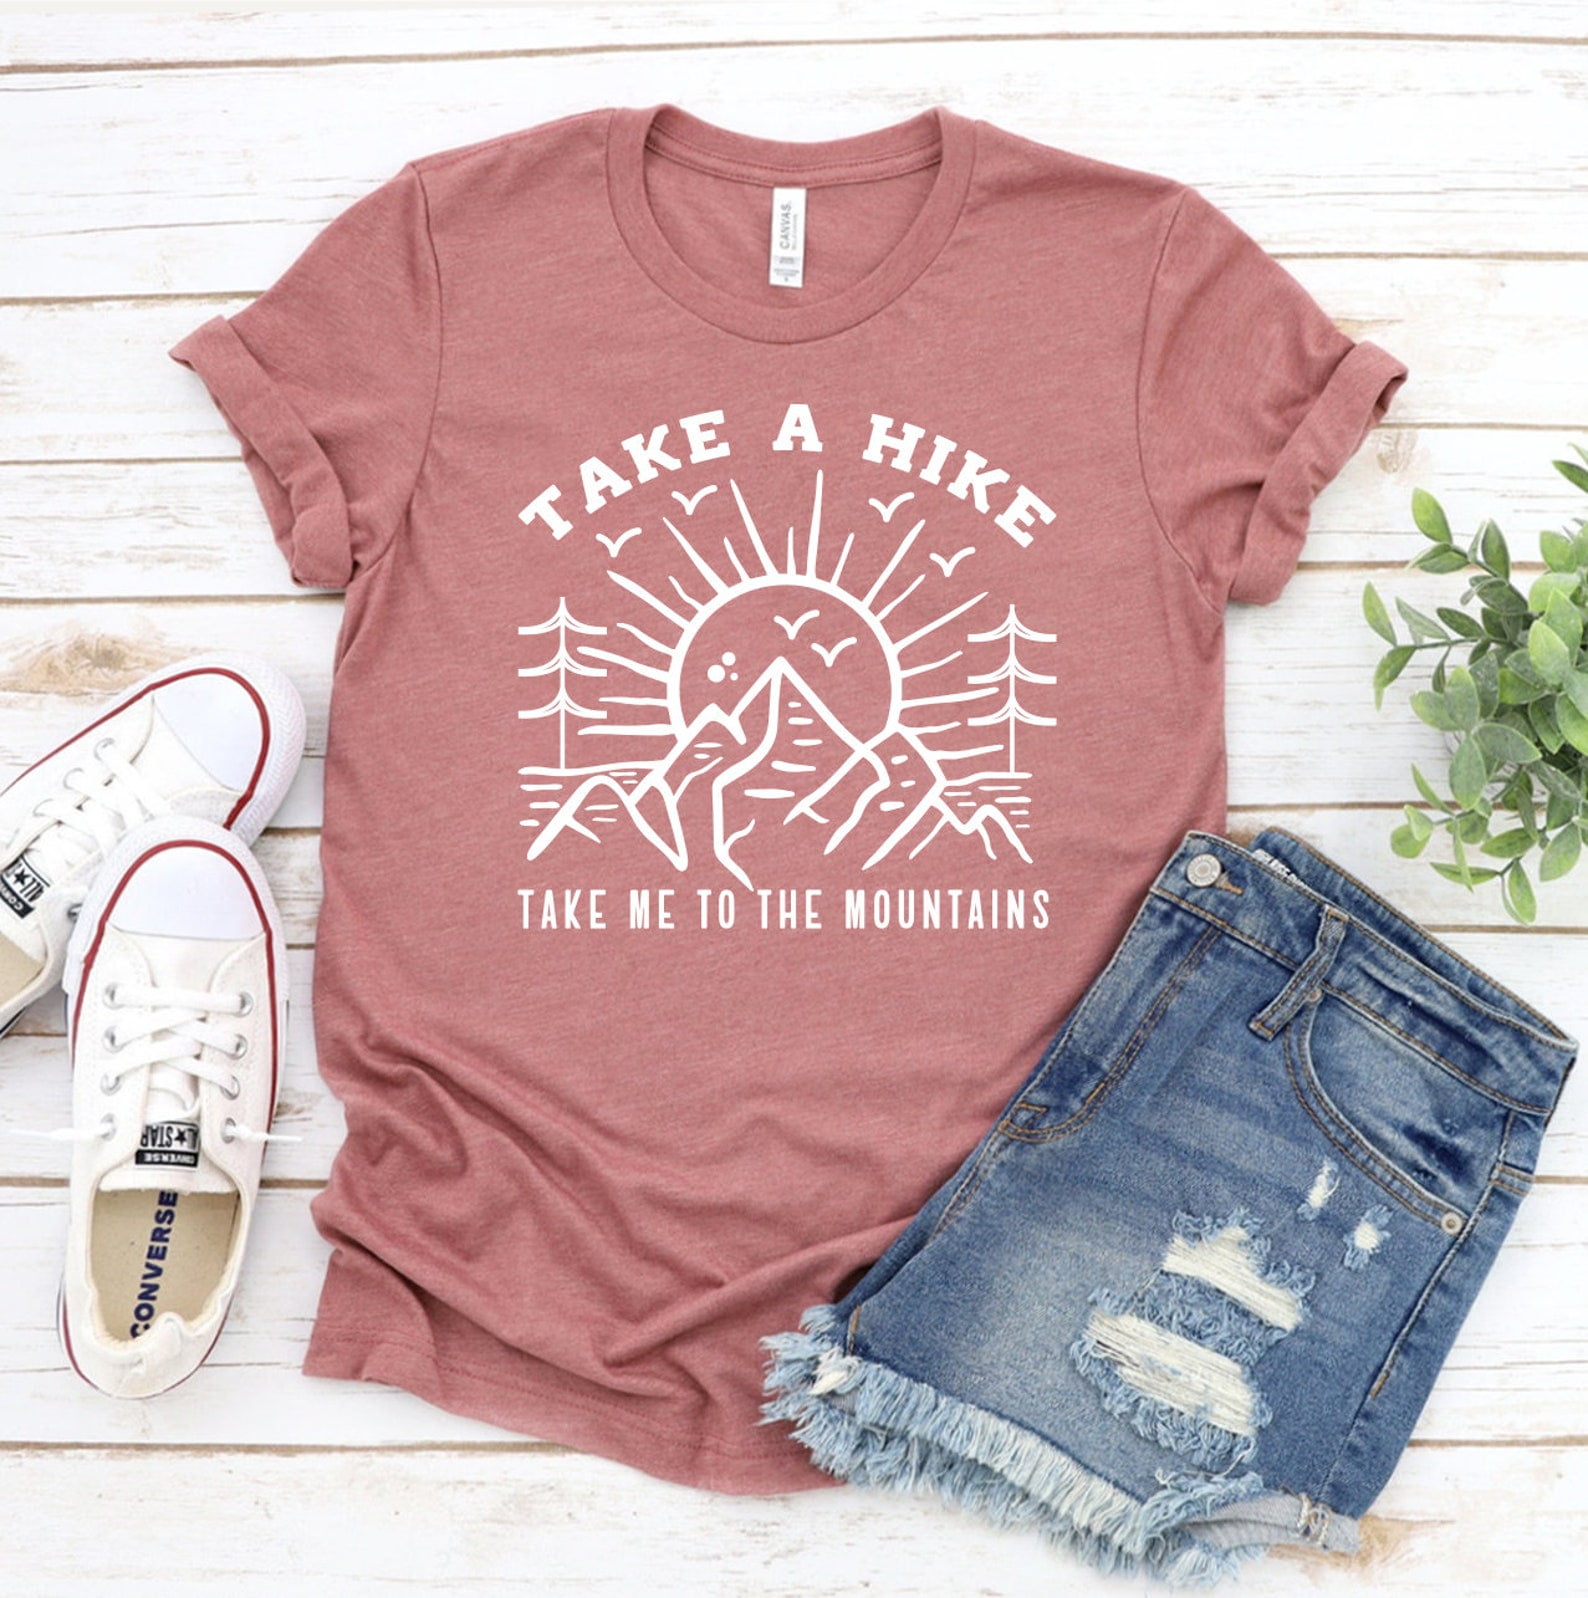 Take A Hike T-shirt Hiking Shirt Women's Tee Camping Top Camp Gift Mountain  Lover Campers Shirts Crew Tank Buddies Family Vacation 